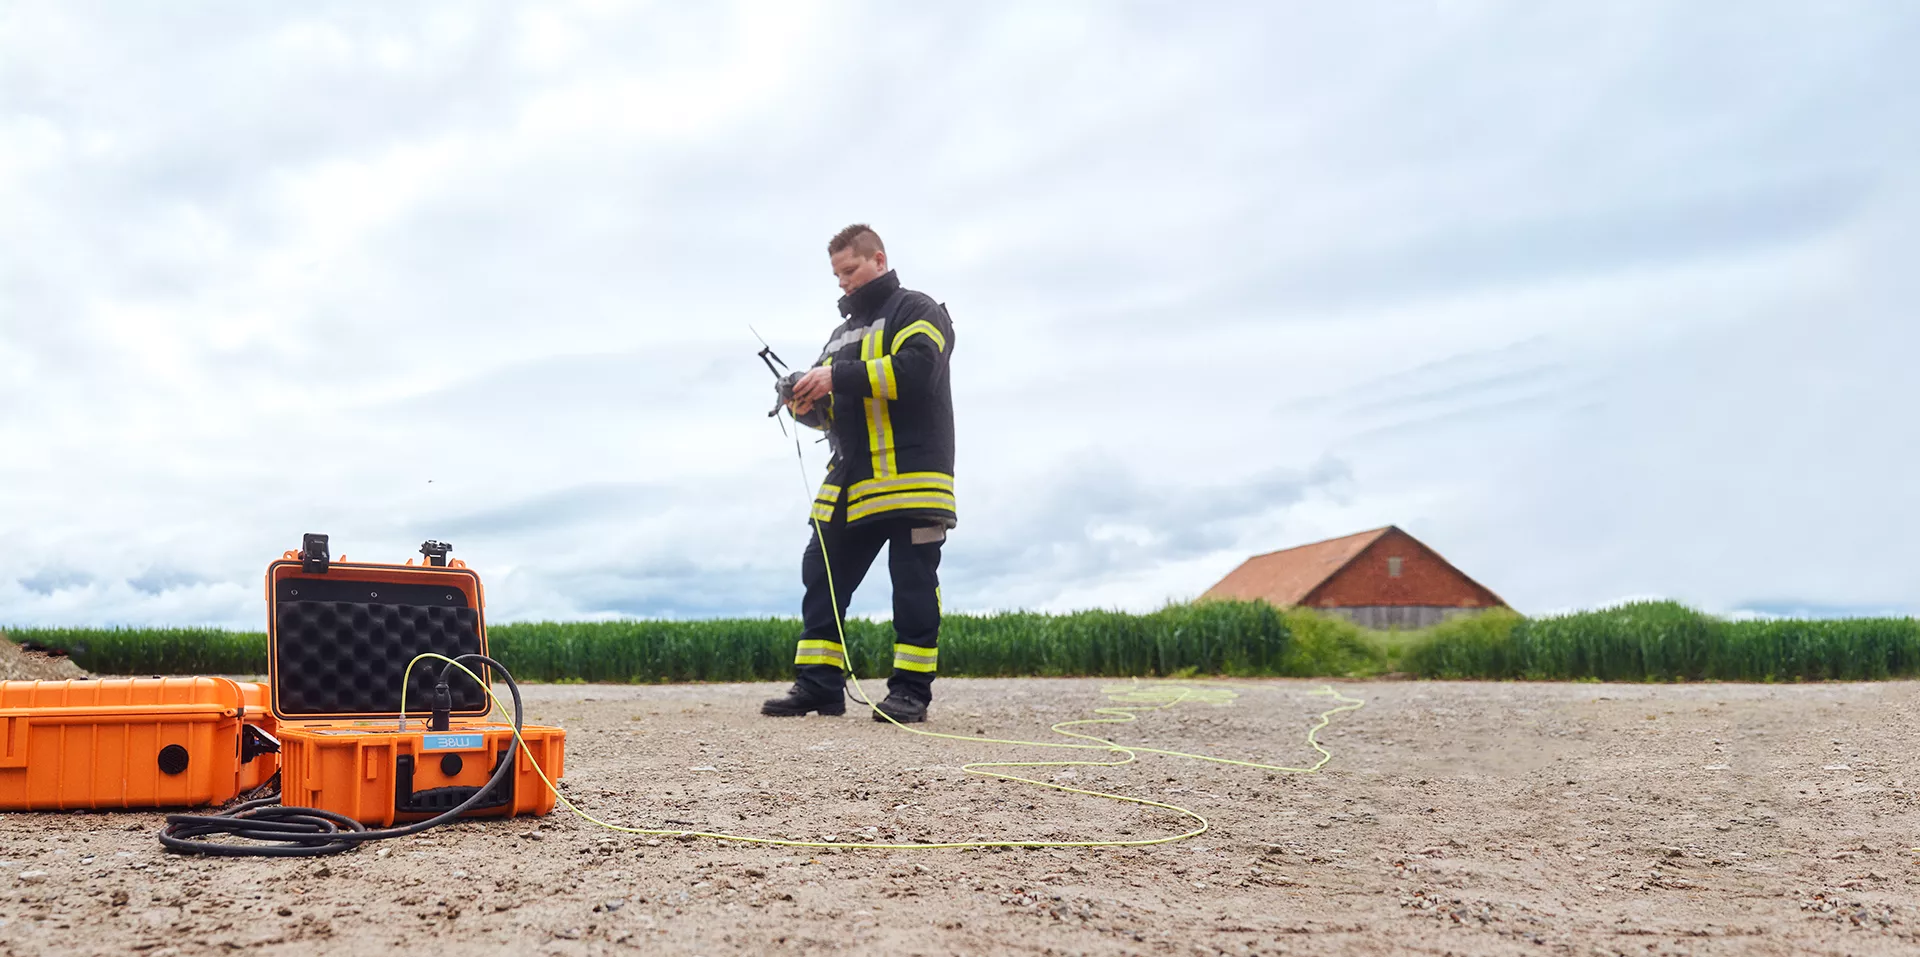 Firefighter has a drone in his hand, in front of it is an open orange case with the battery for the drone inside.